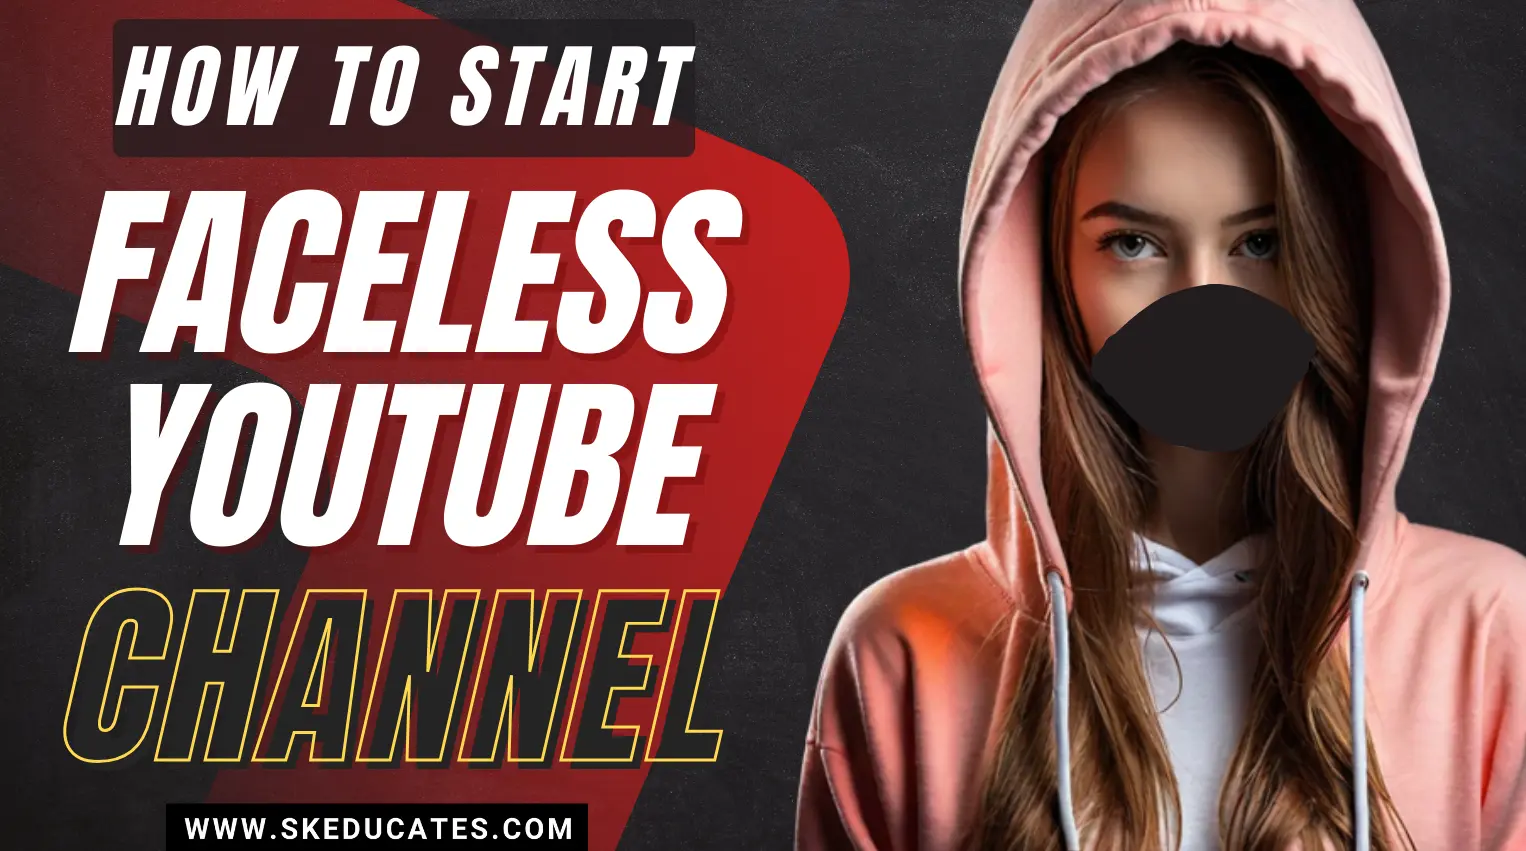 how-to-start-a-faceless-youtube-channels-by-skeducates